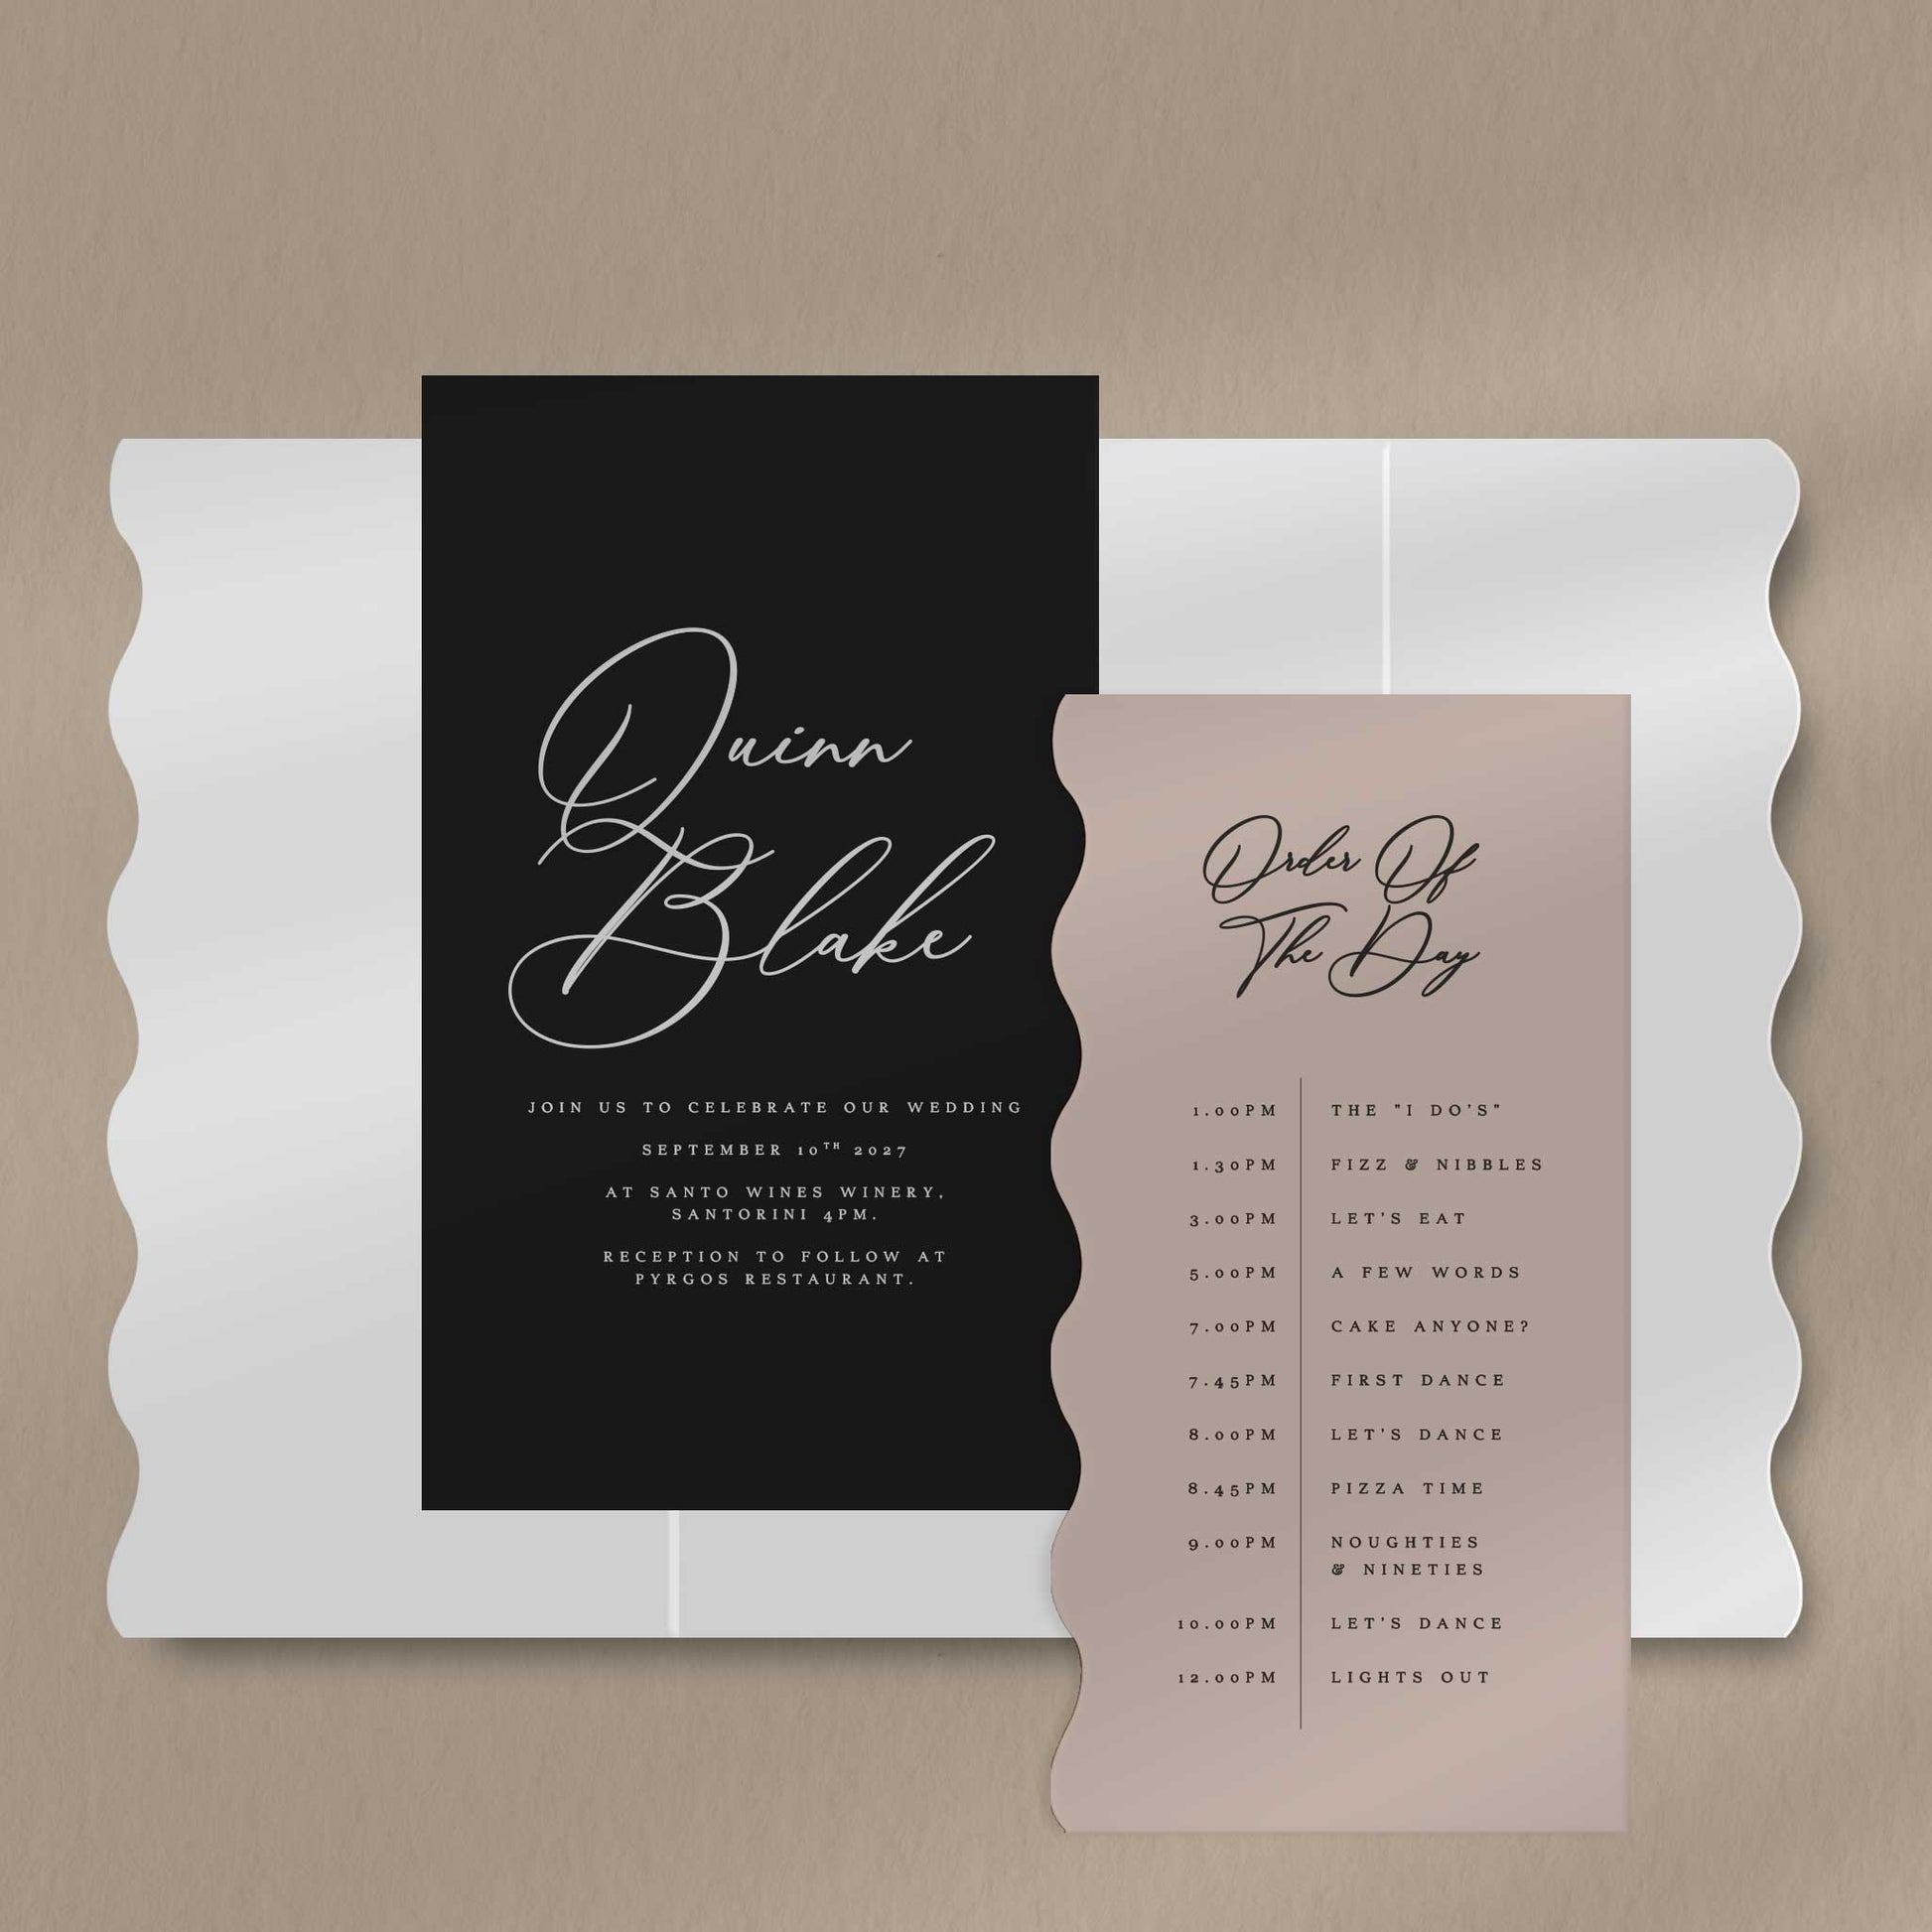 Scallop Envelope Sample  Ivy and Gold Wedding Stationery Quinn  